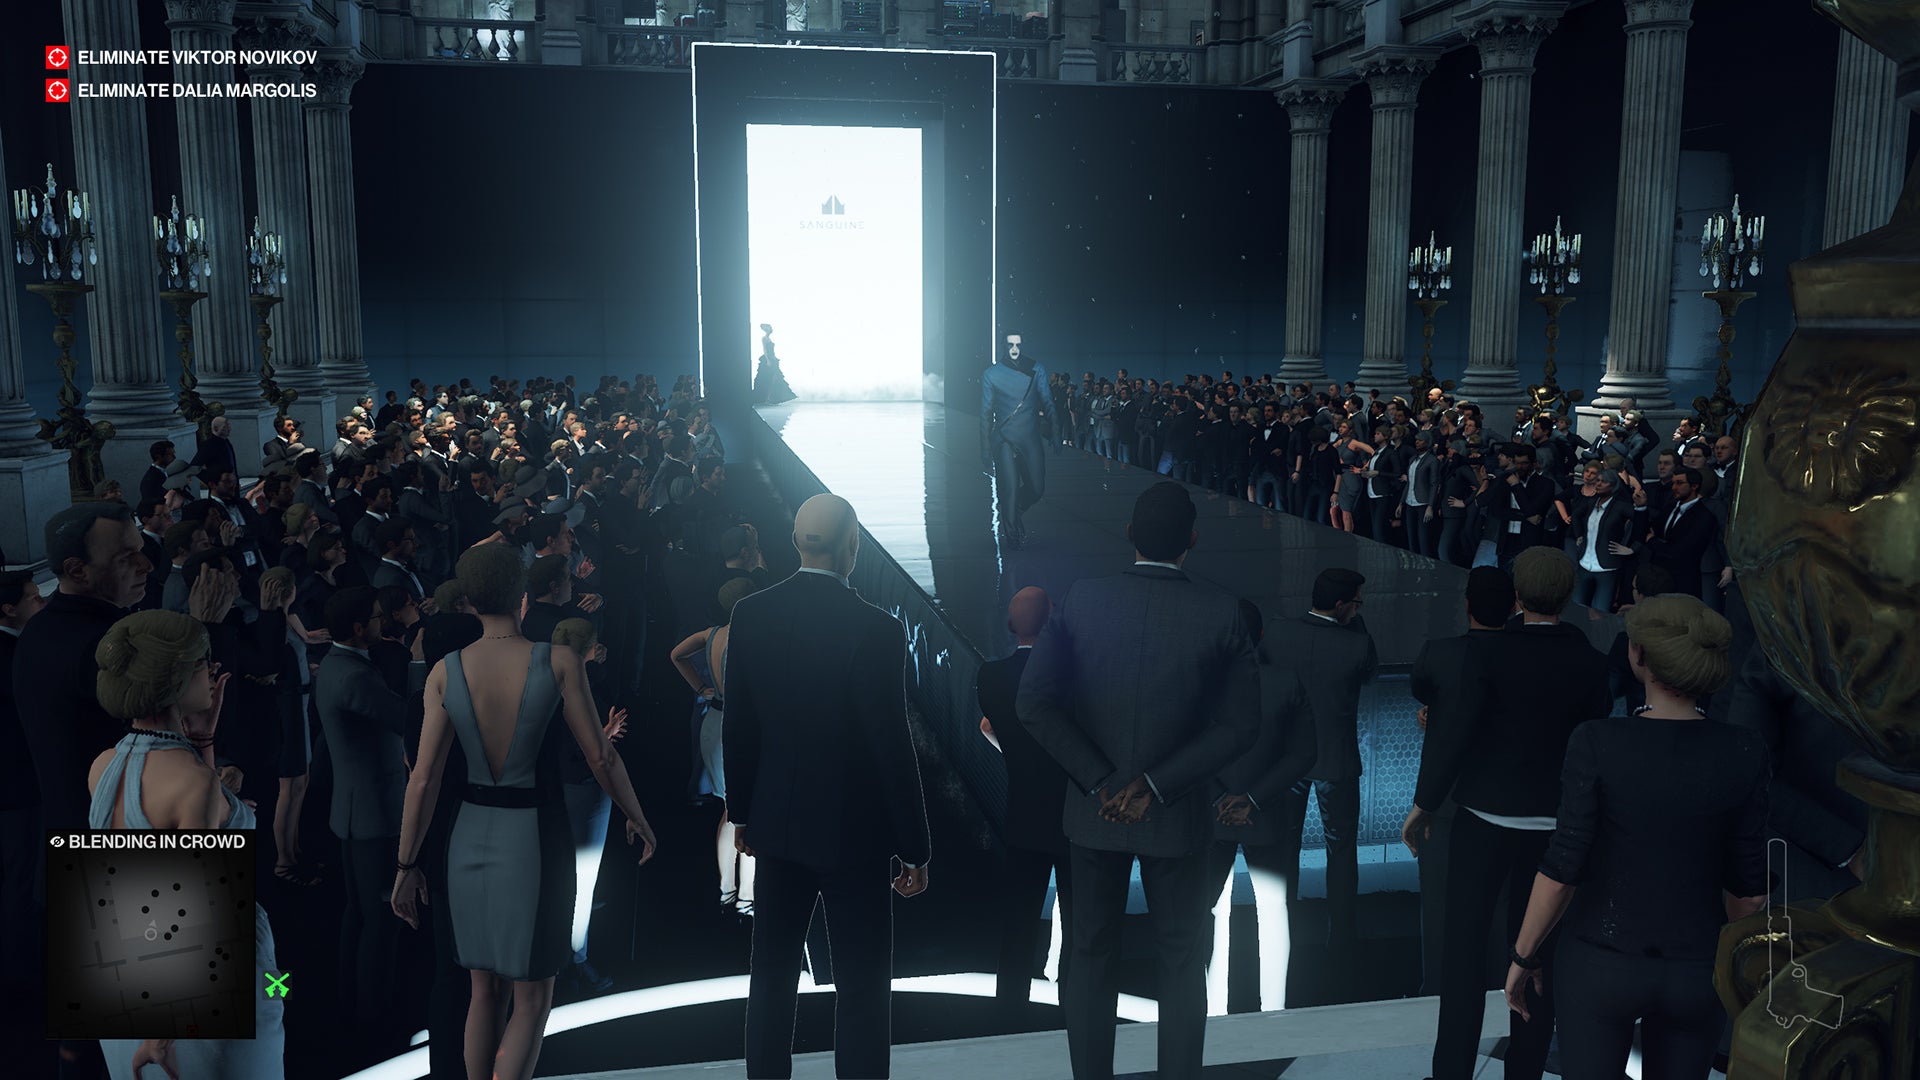 A screenshot of the Paris level, showing Ian Hitman standing at the end of a long, sleek, fashion runway, watching from the crowd as models walk down.